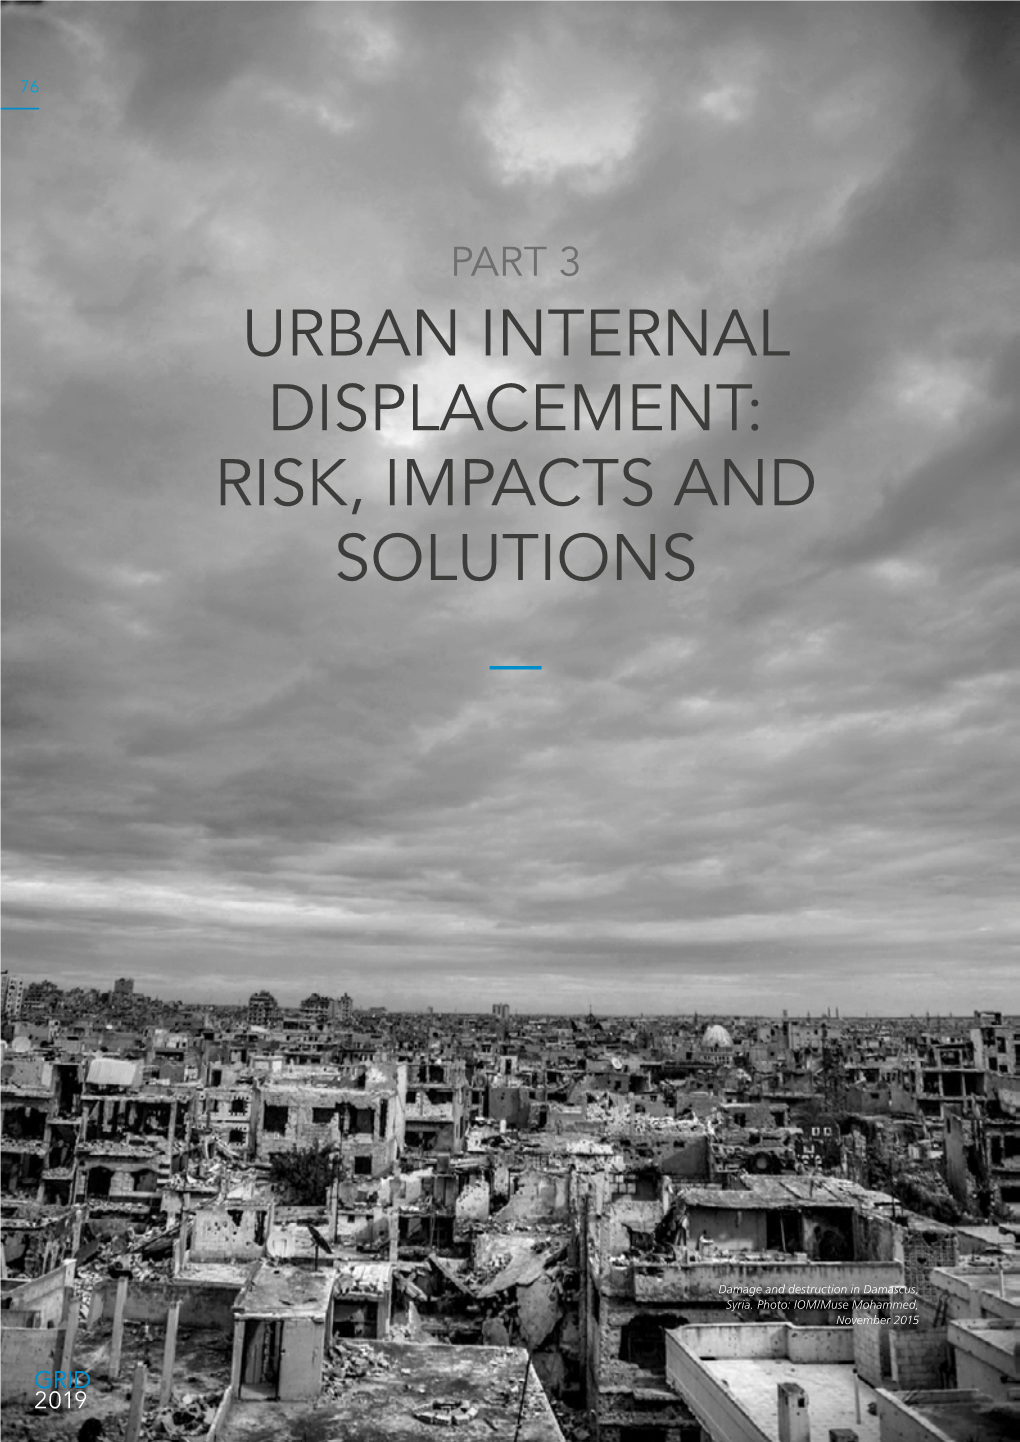 Urban Internal Displacement: Risk, Impacts and Solutions